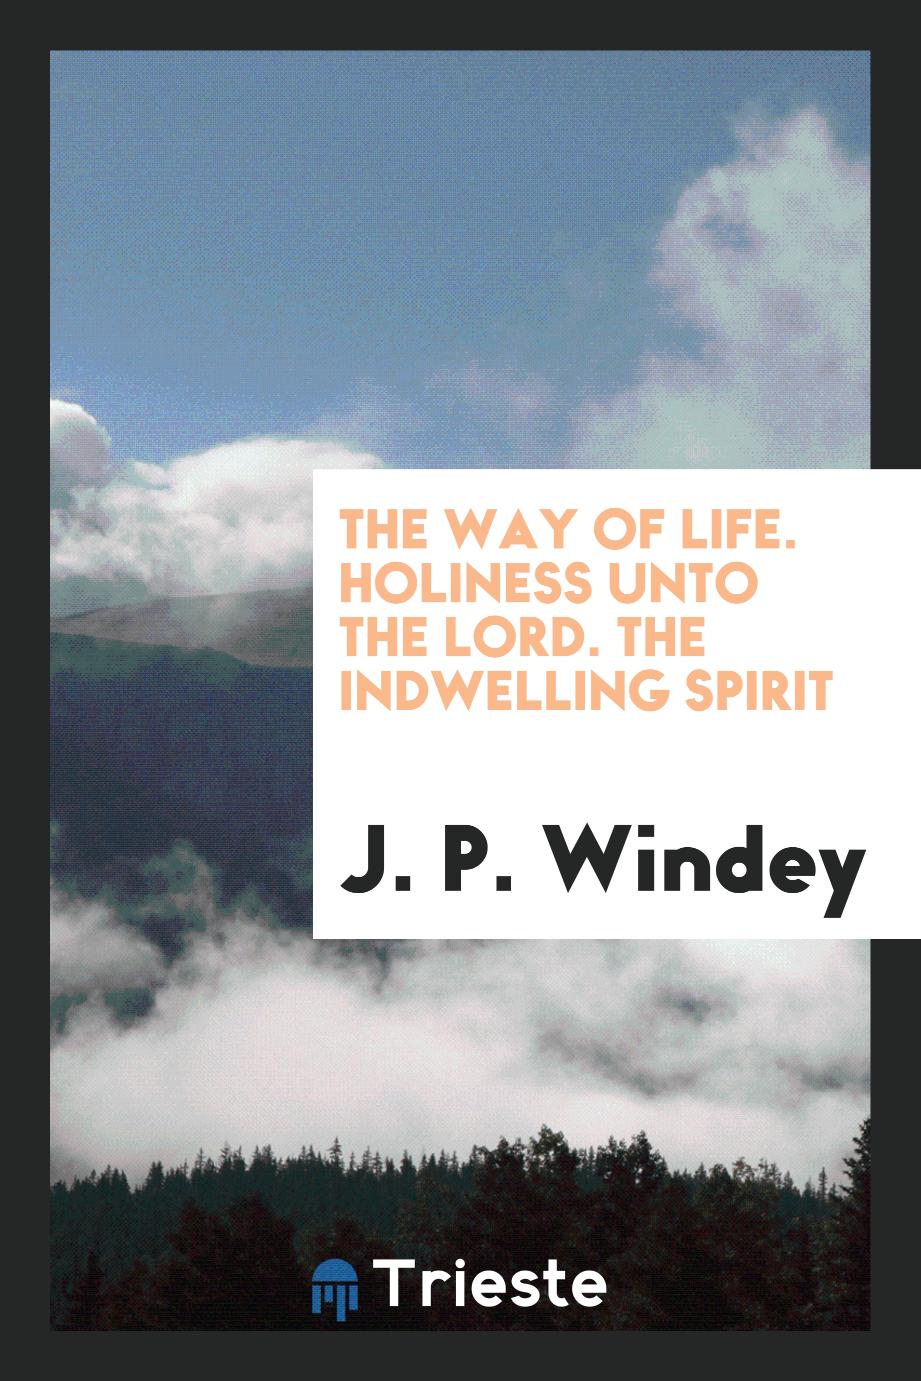 The Way of Life. Holiness Unto the Lord. The Indwelling Spirit